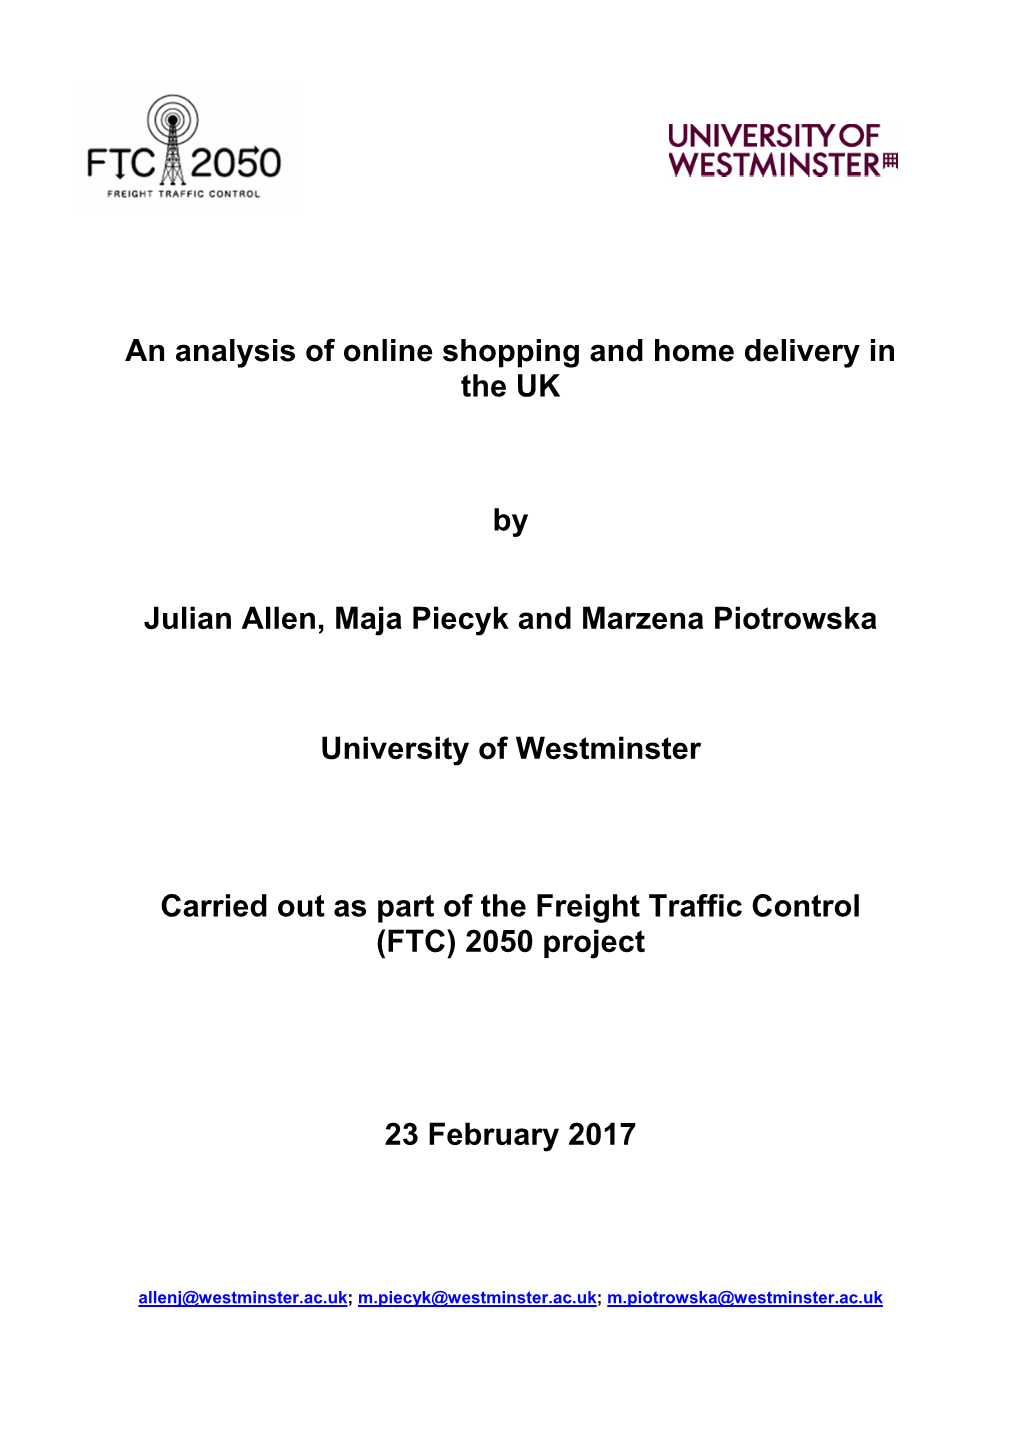 An Analysis of Online Shopping and Home Delivery in the UK